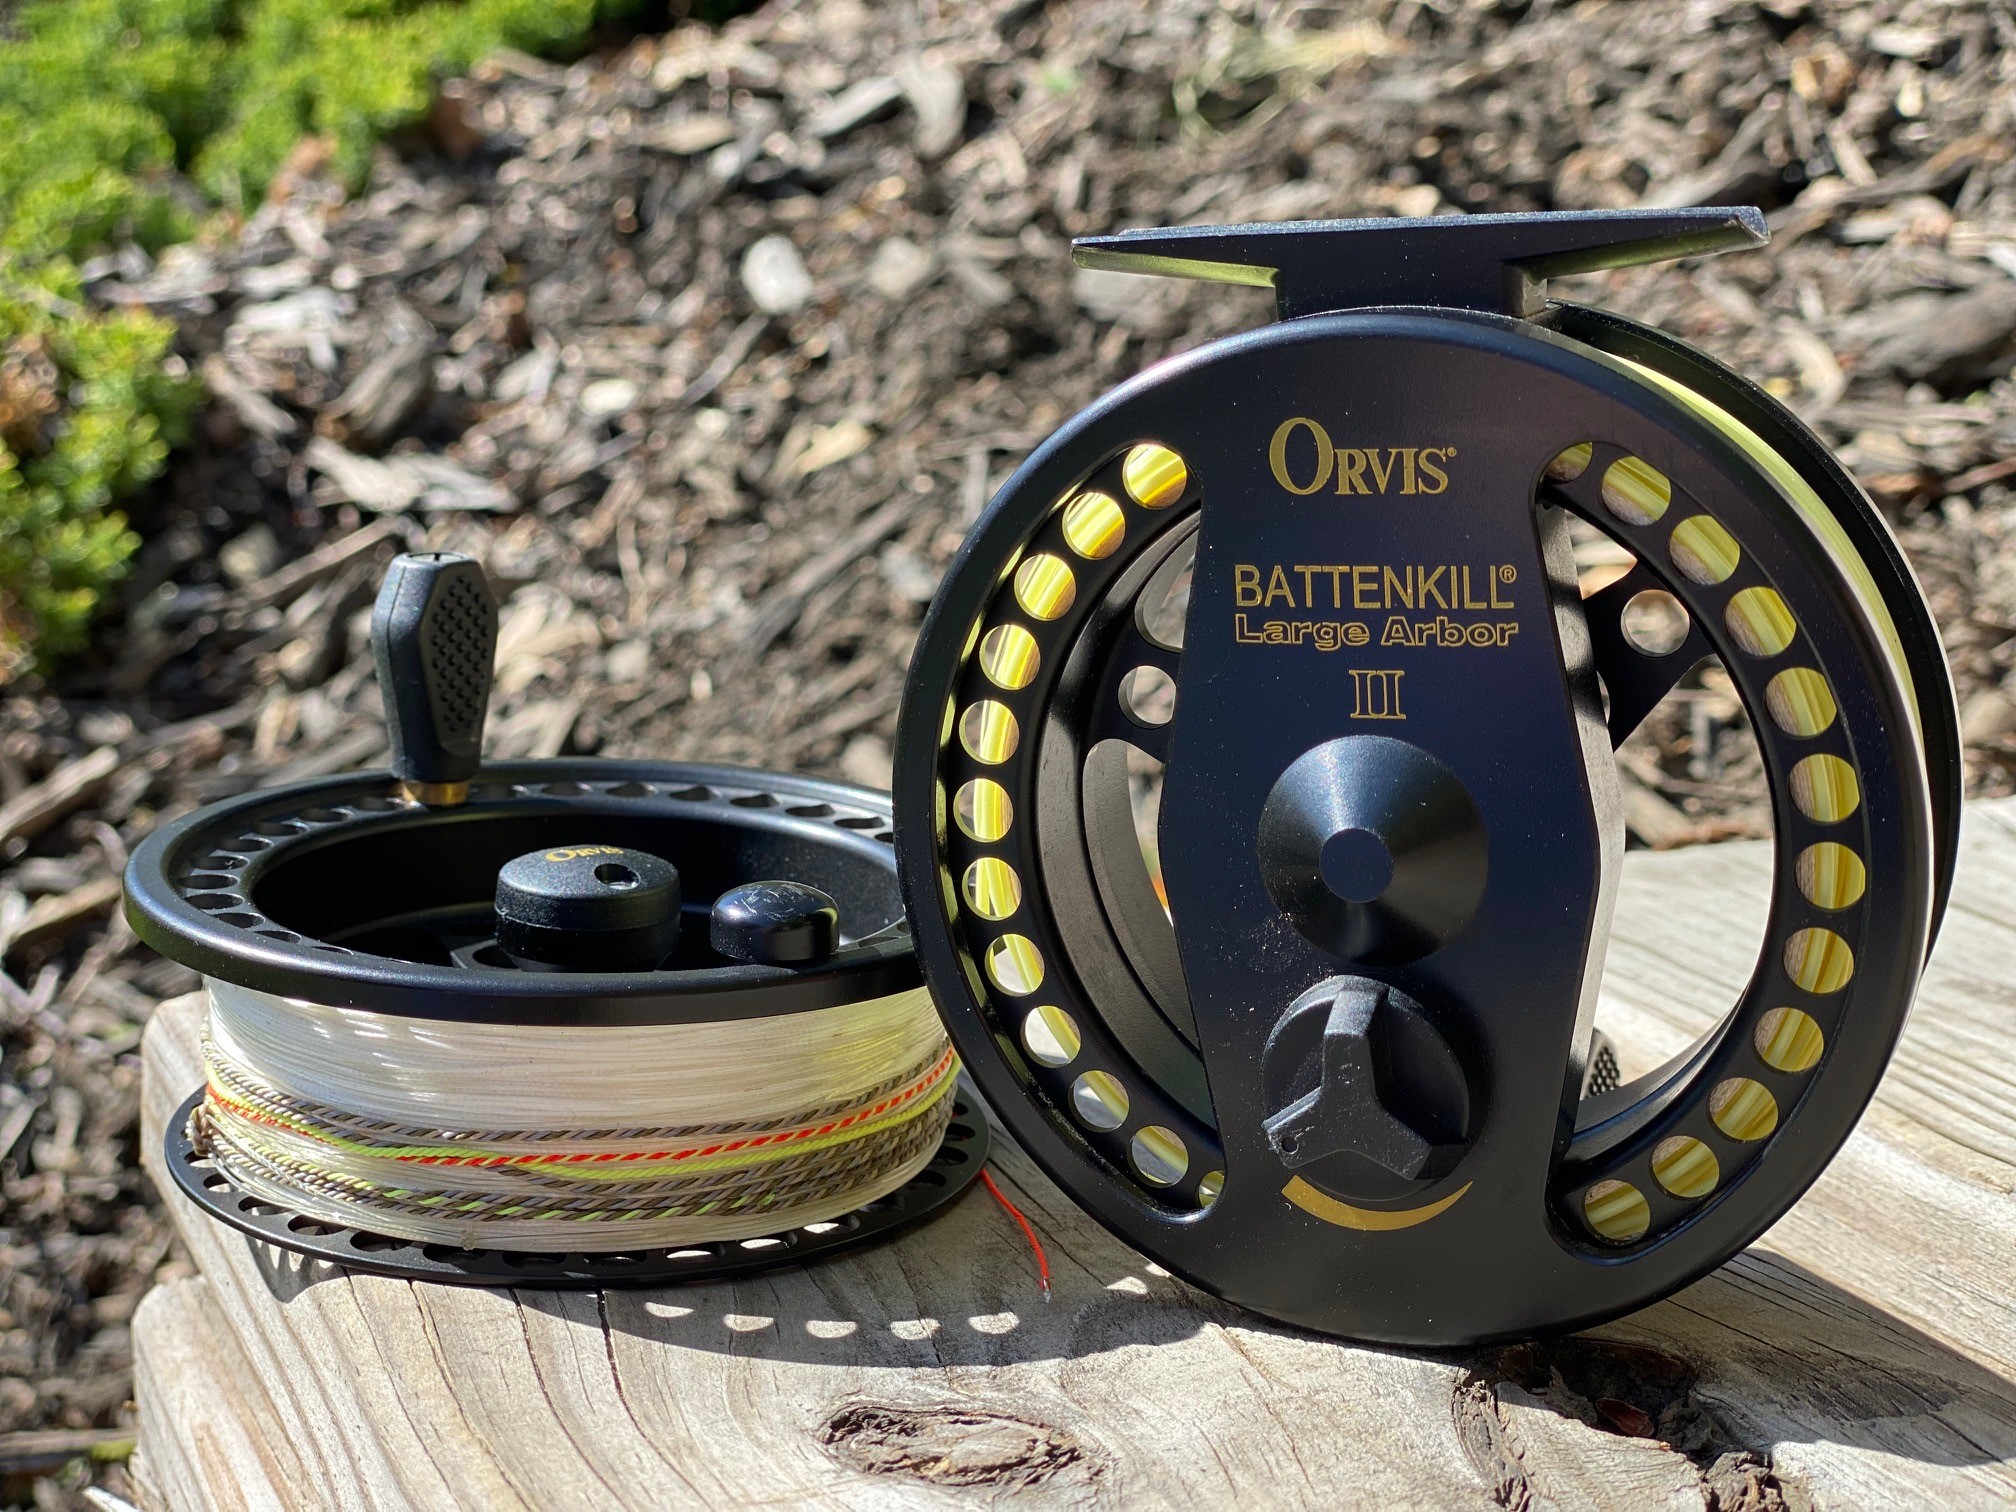 Throwback Gear Review: Orvis Battenkill Large Arbor - Casting Across